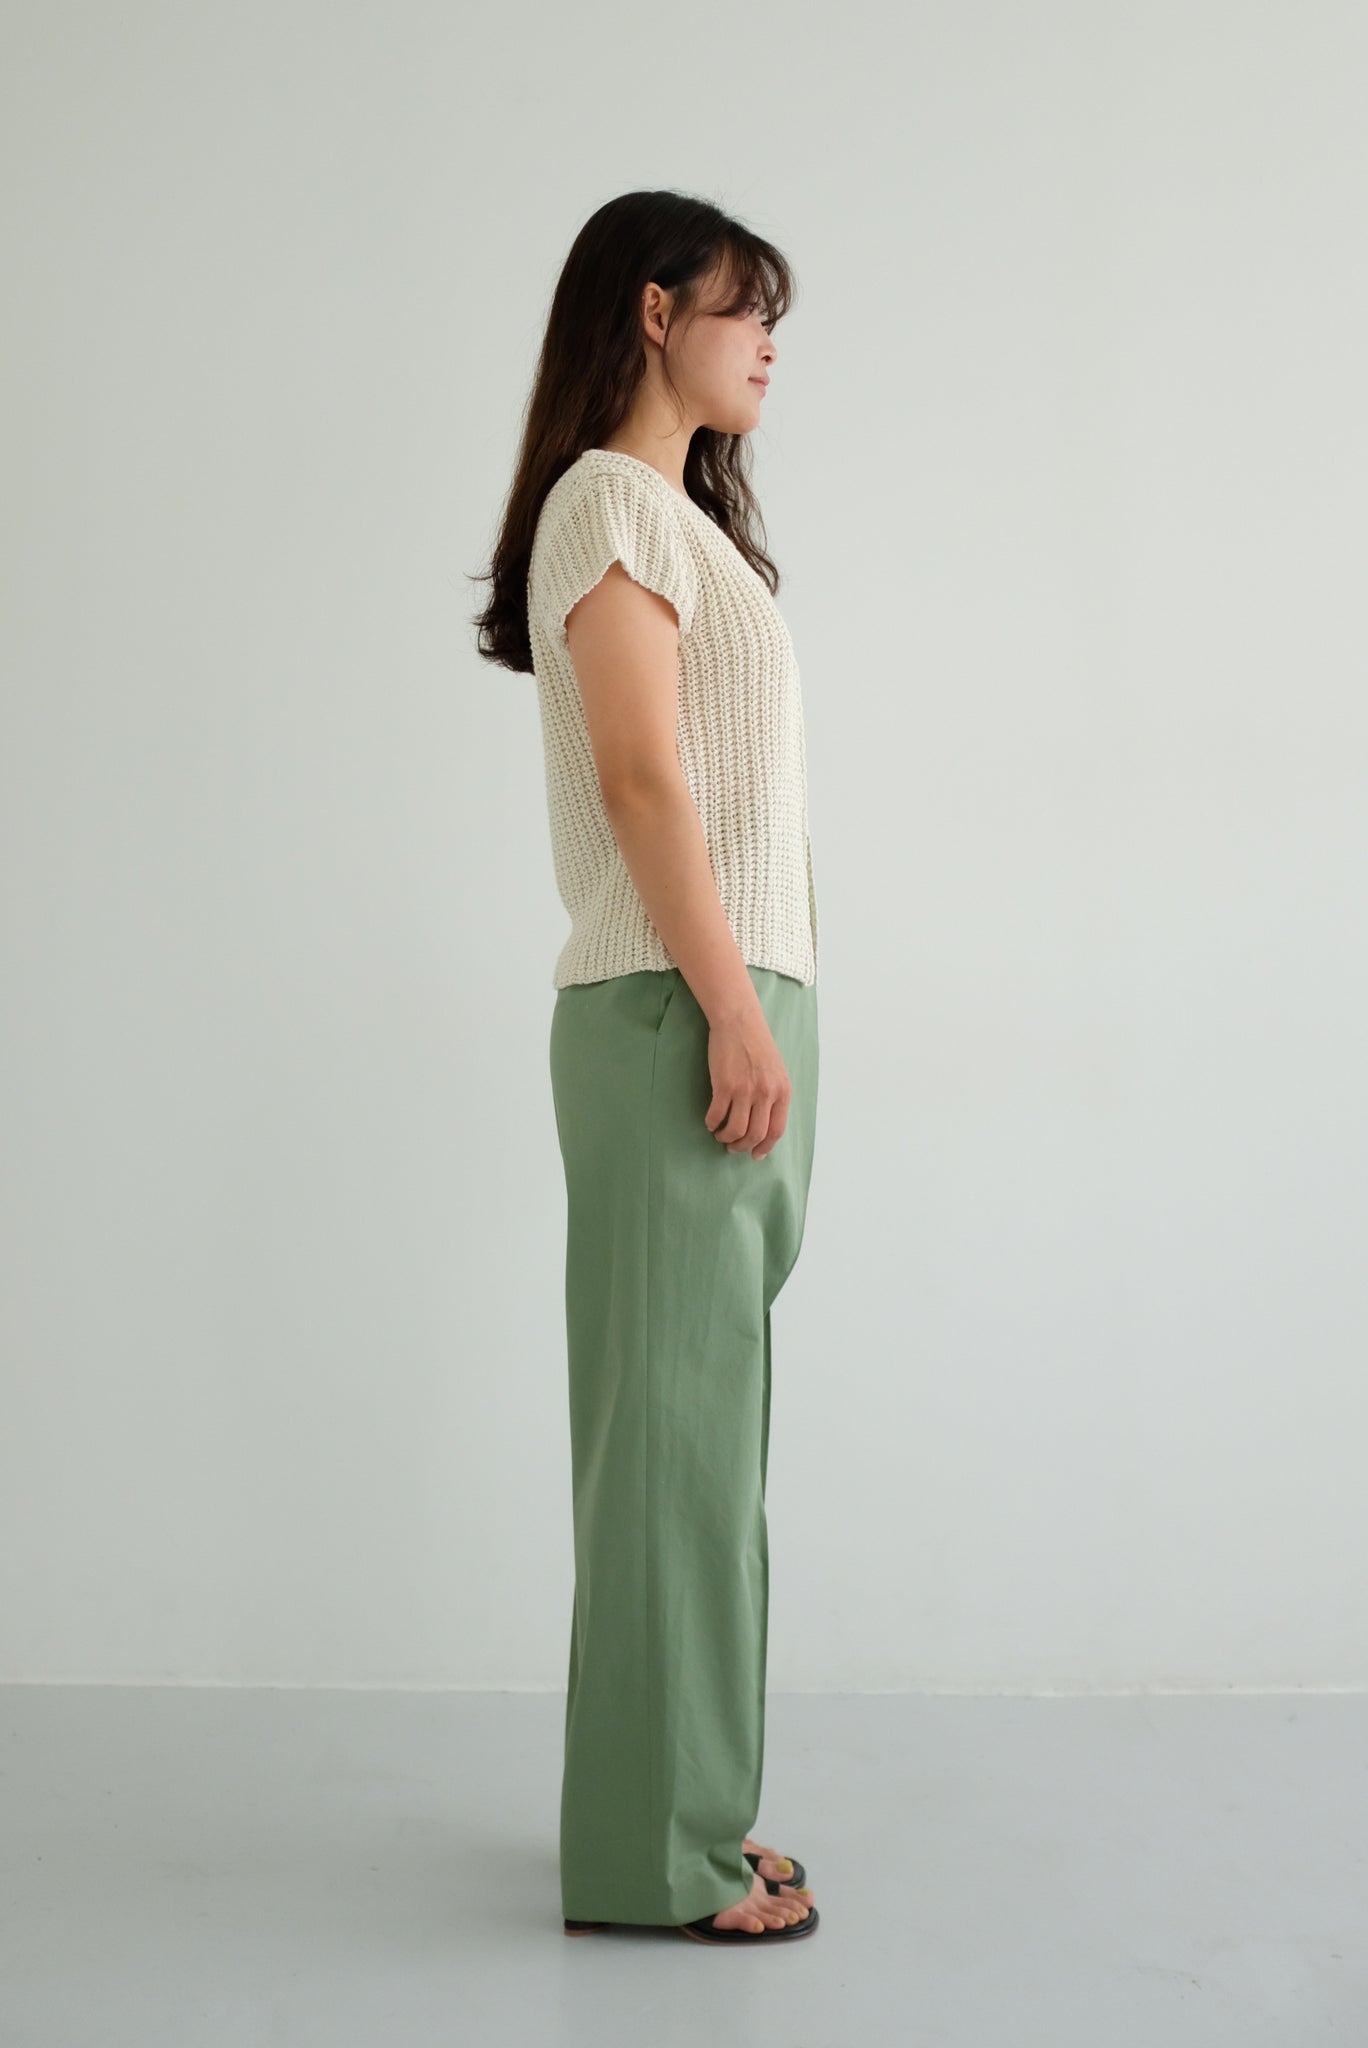 Over Wrap Pants in Green